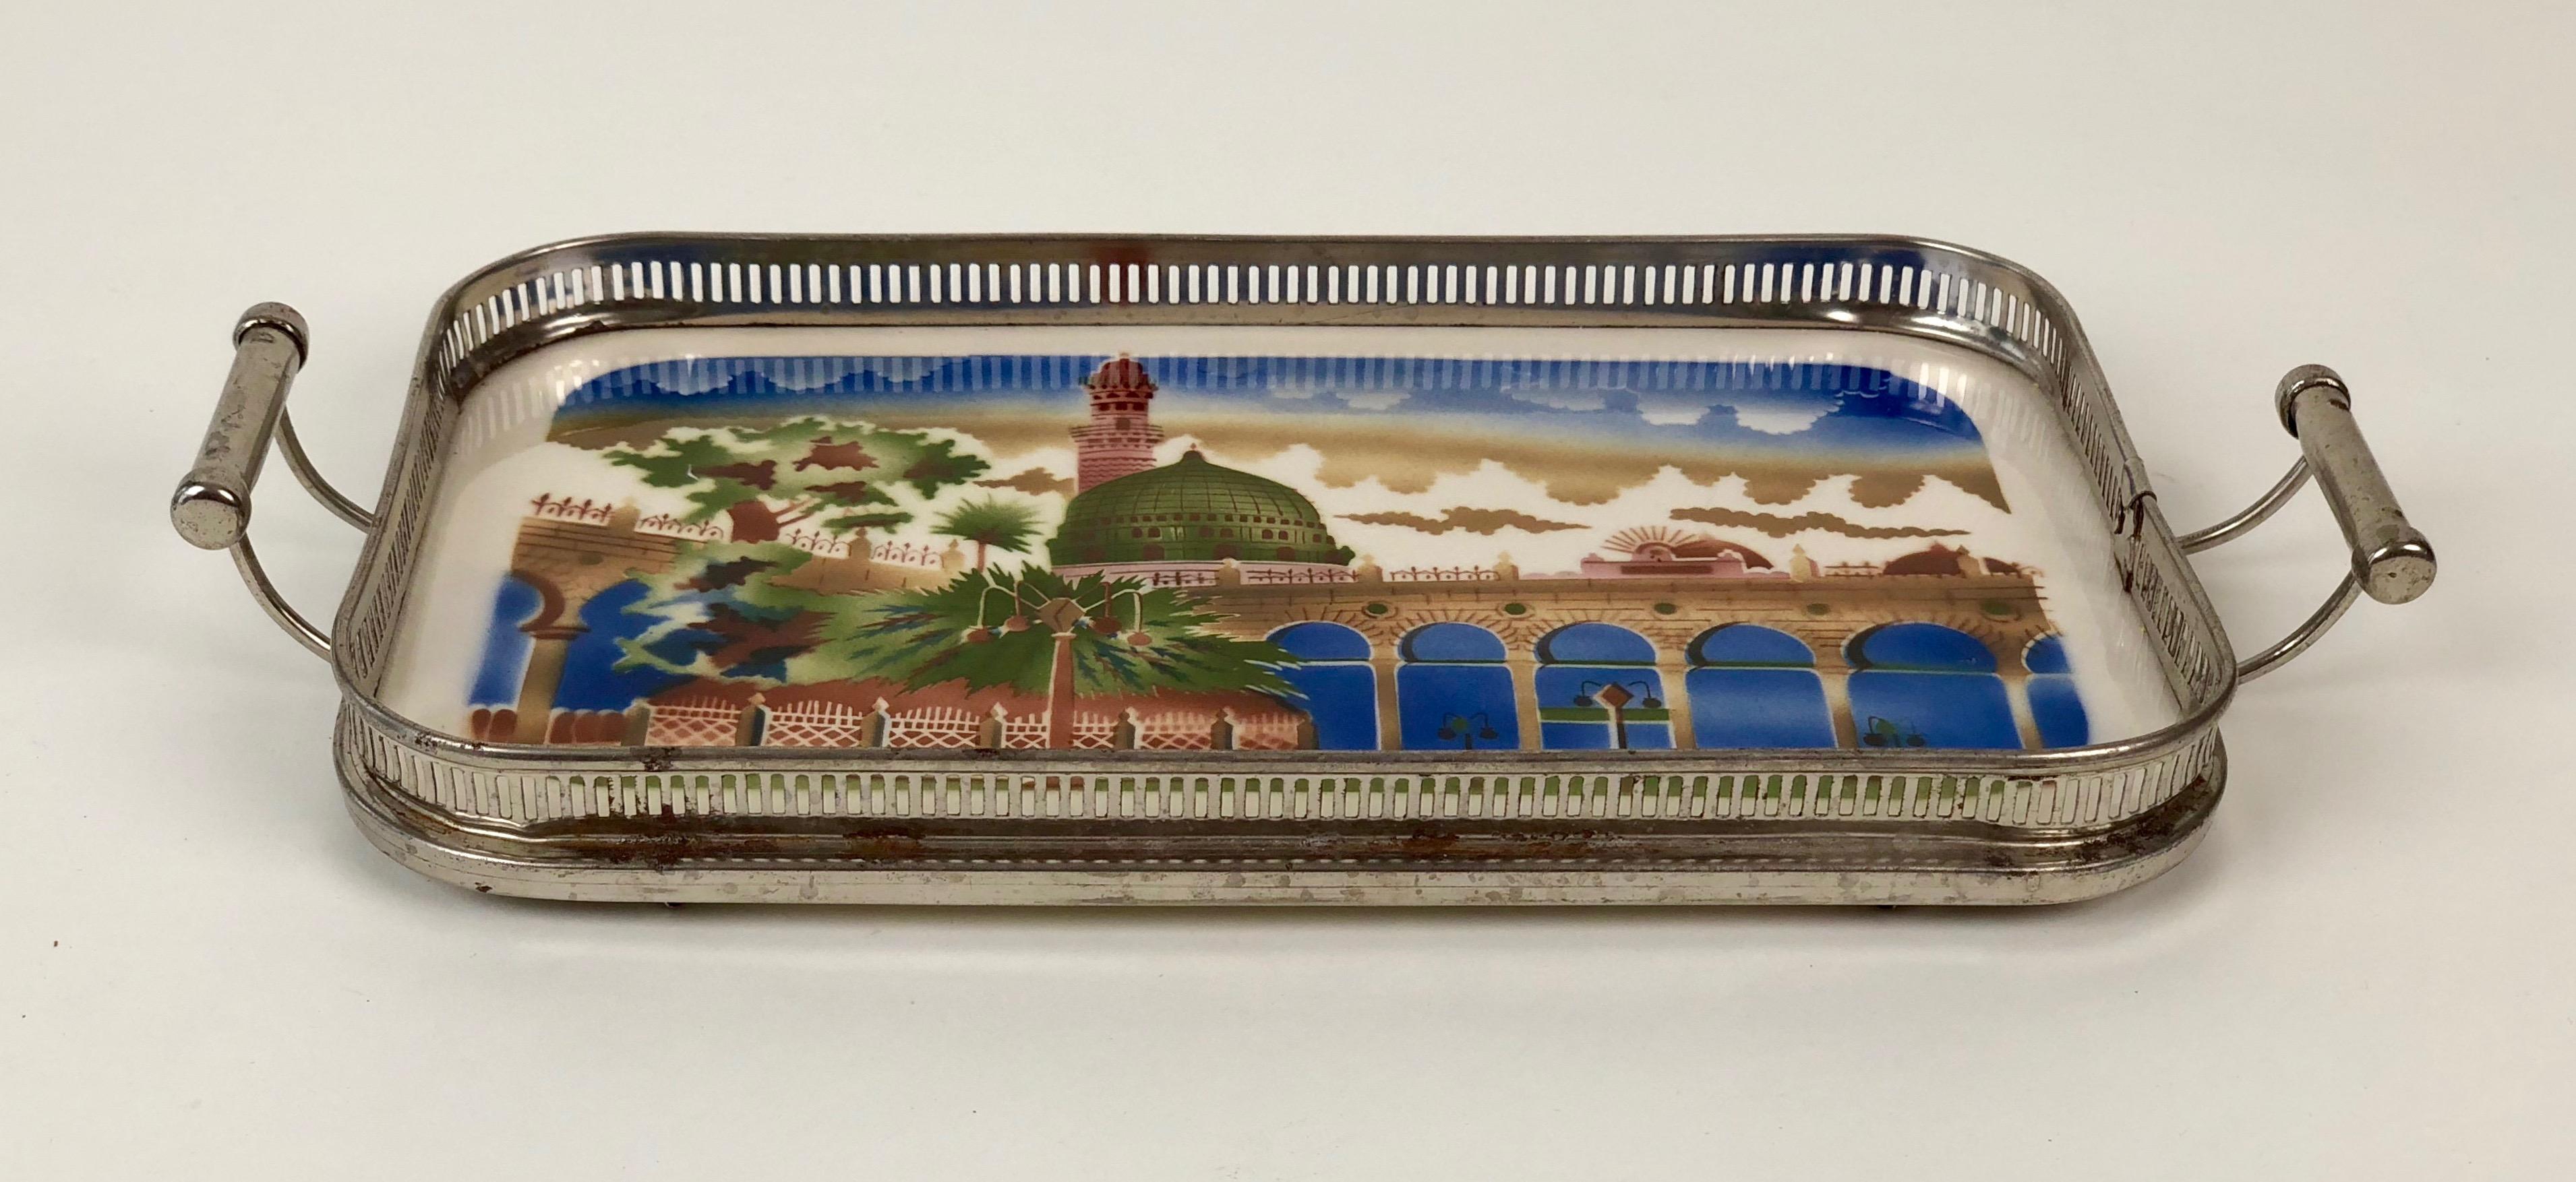 Jugendstil Ceramic Tray with Metal Montage and Oriental Motive from the 1920s For Sale